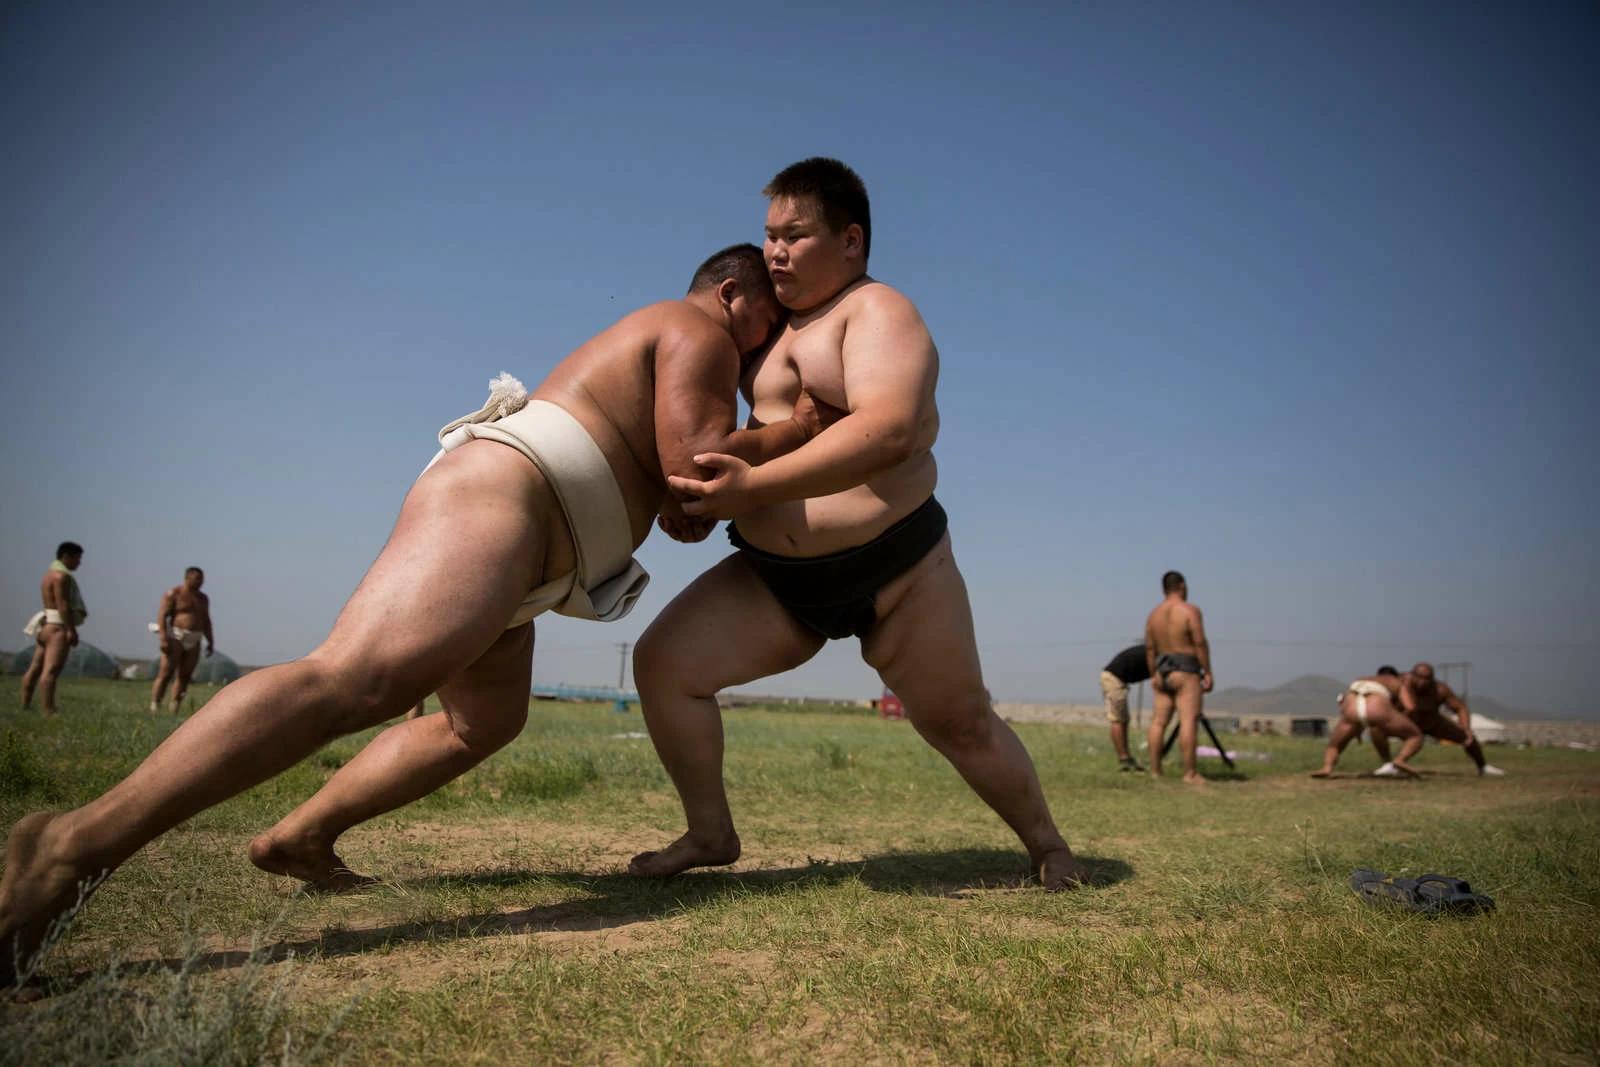 Wrestlers practice their tachi-ai (initial charge) at a sumo wrestling training camp on the outskirts of Ulaanbaatar, Mongolia on Tuesday, July 26, 2016. Photo and story credits by Taylor Weidman.